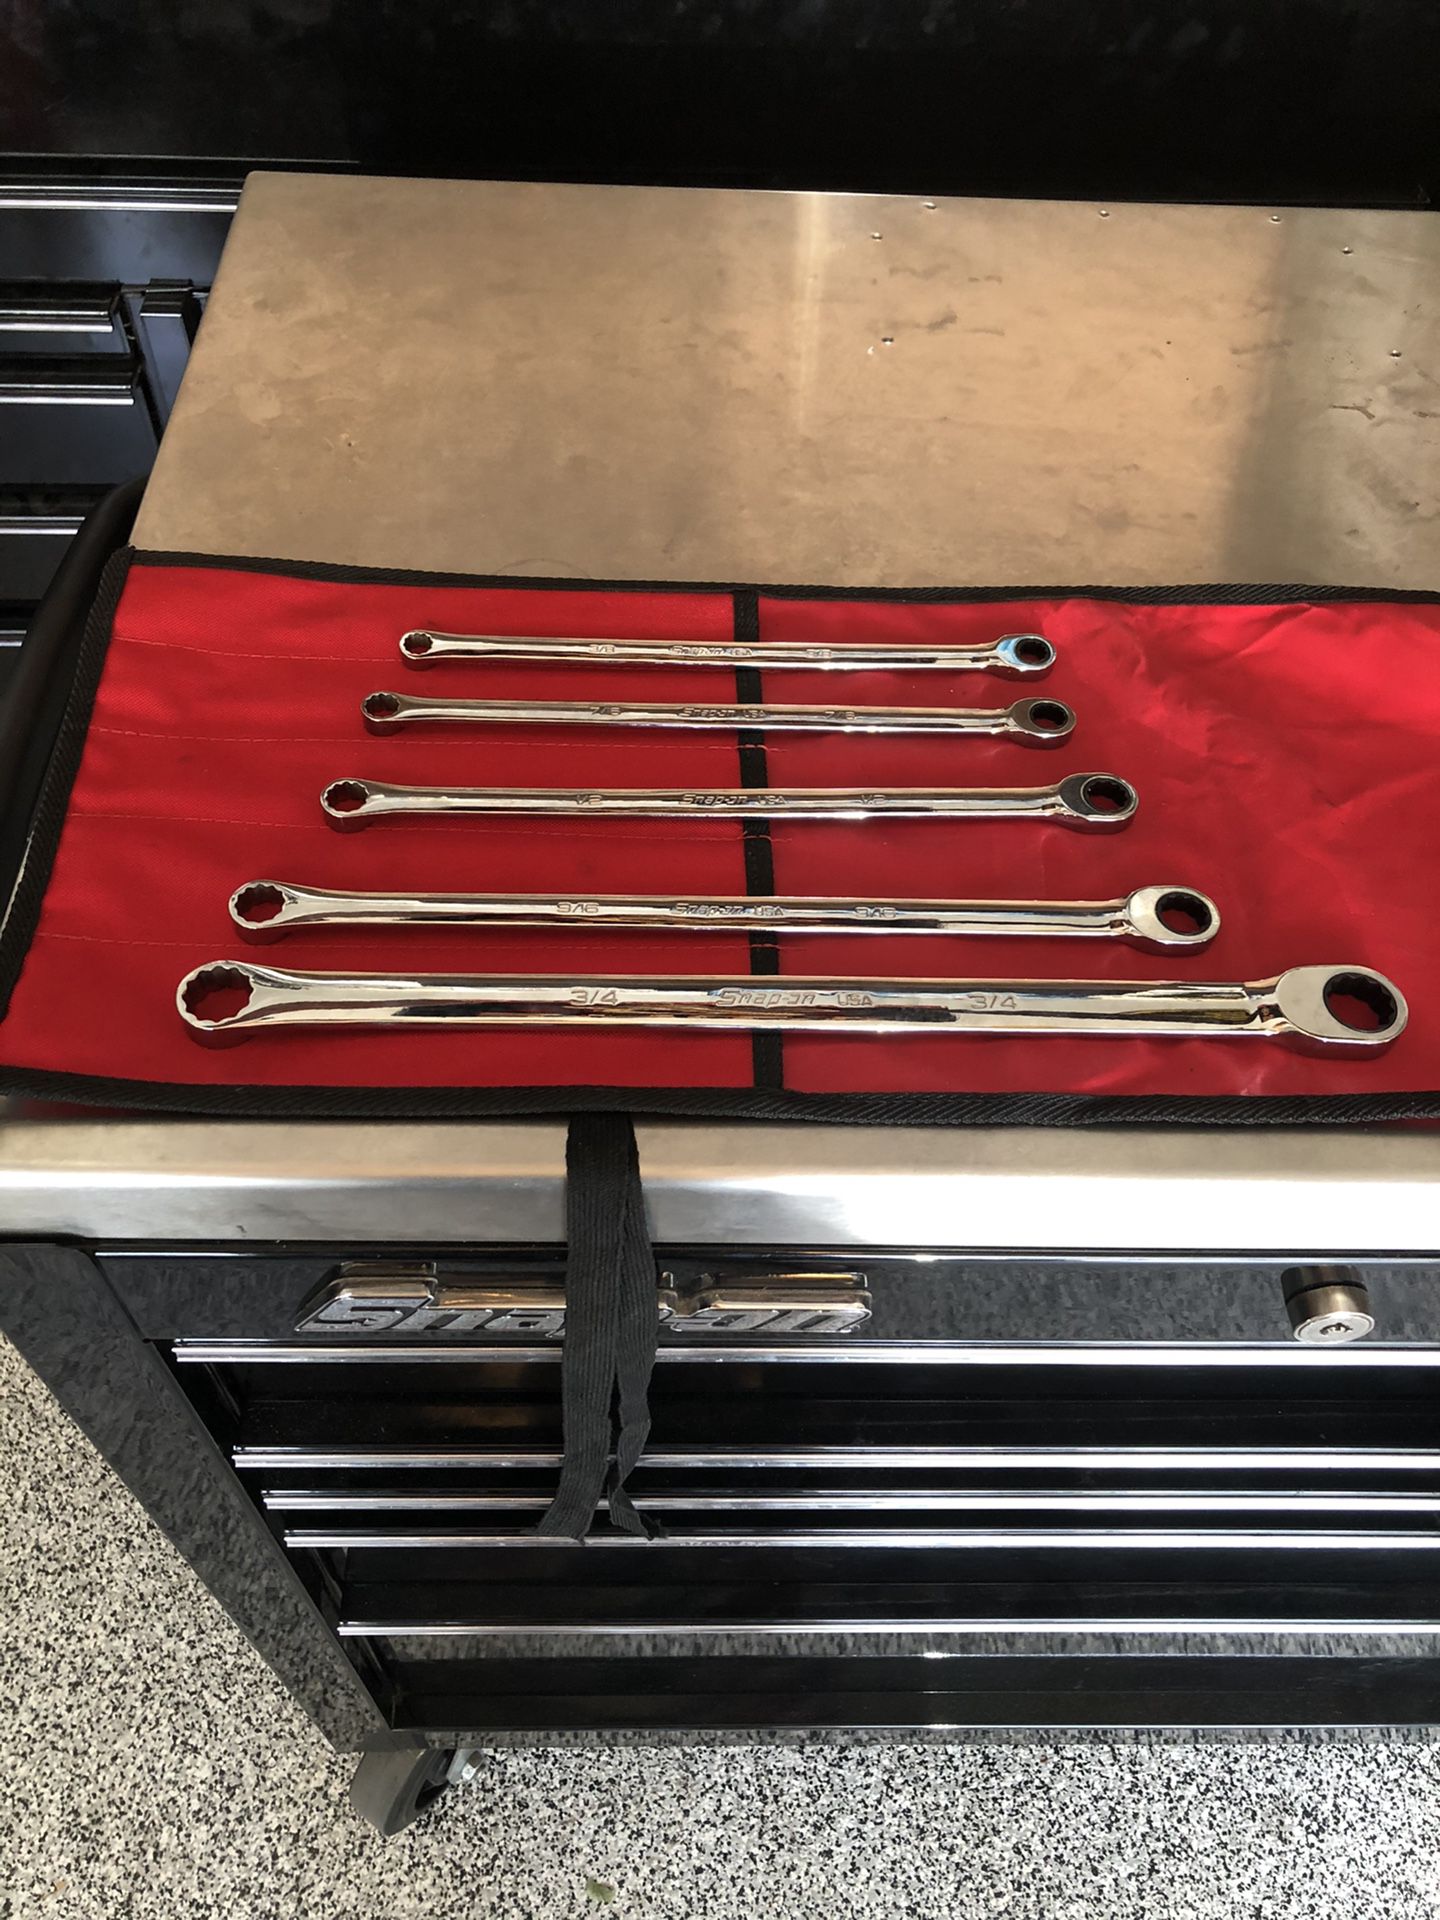 Snap on. Brand new sae 12pt high performance box ratcheting wrench set $275 FIRM